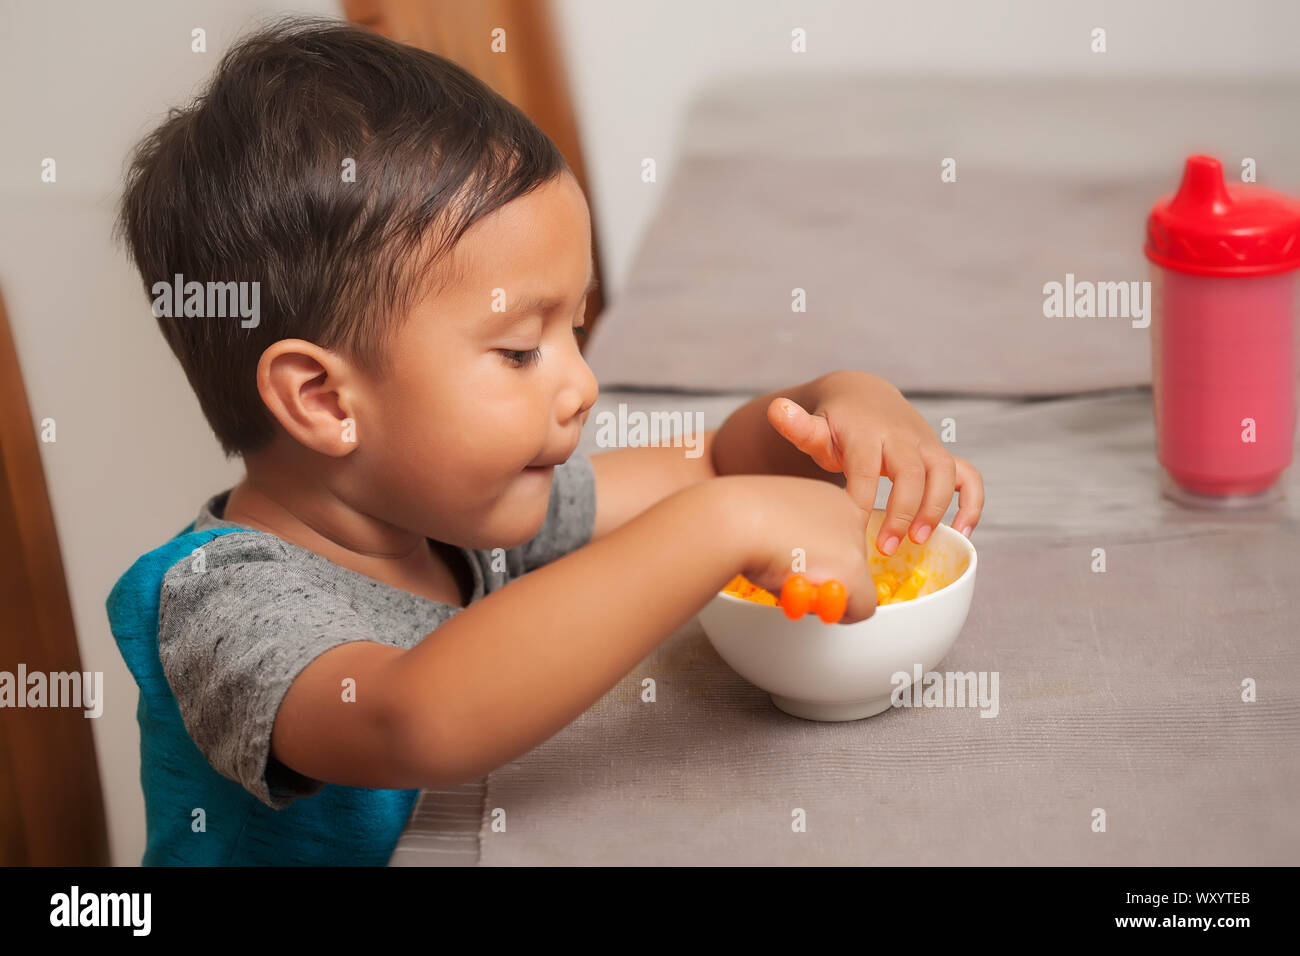 A cute toddler shows interest in eating a mac and cheese lunch, and holds spoon to self-feed. Stock Photo